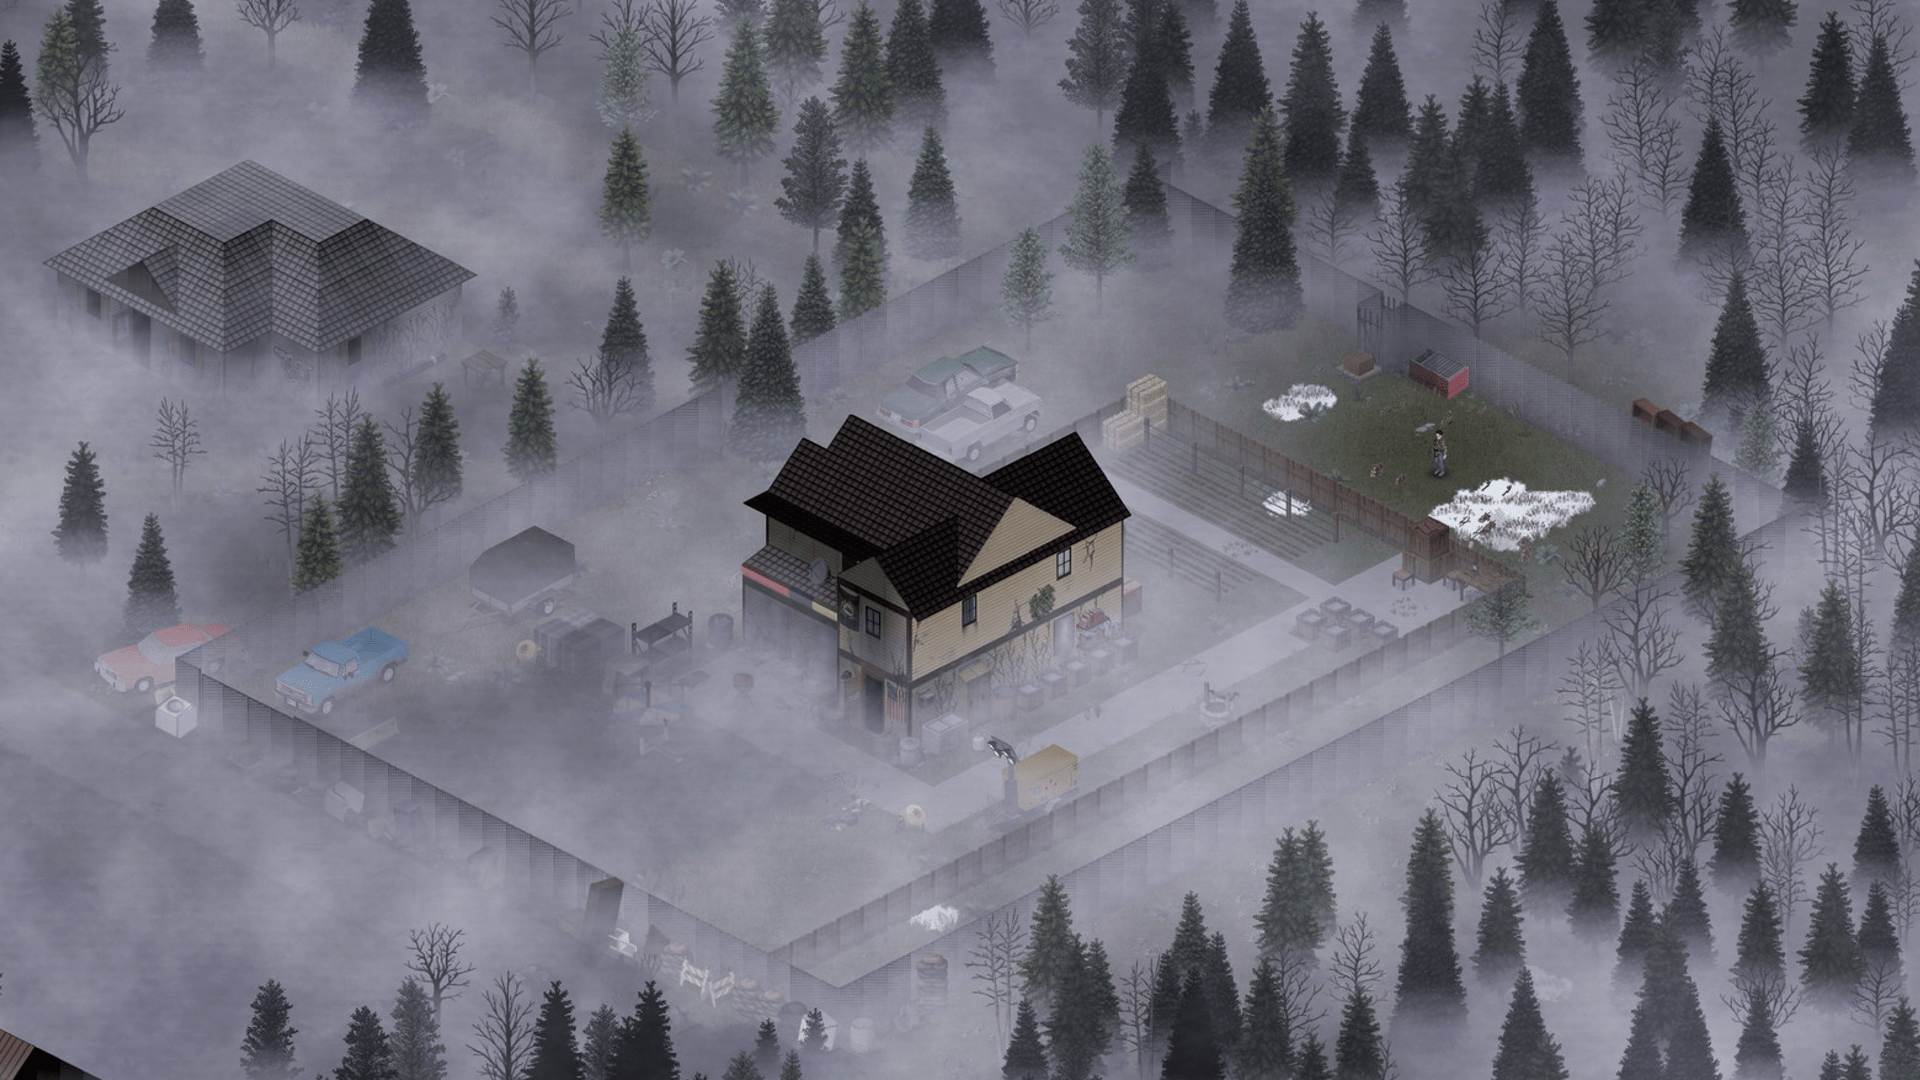 zombie infested house in foggy woods